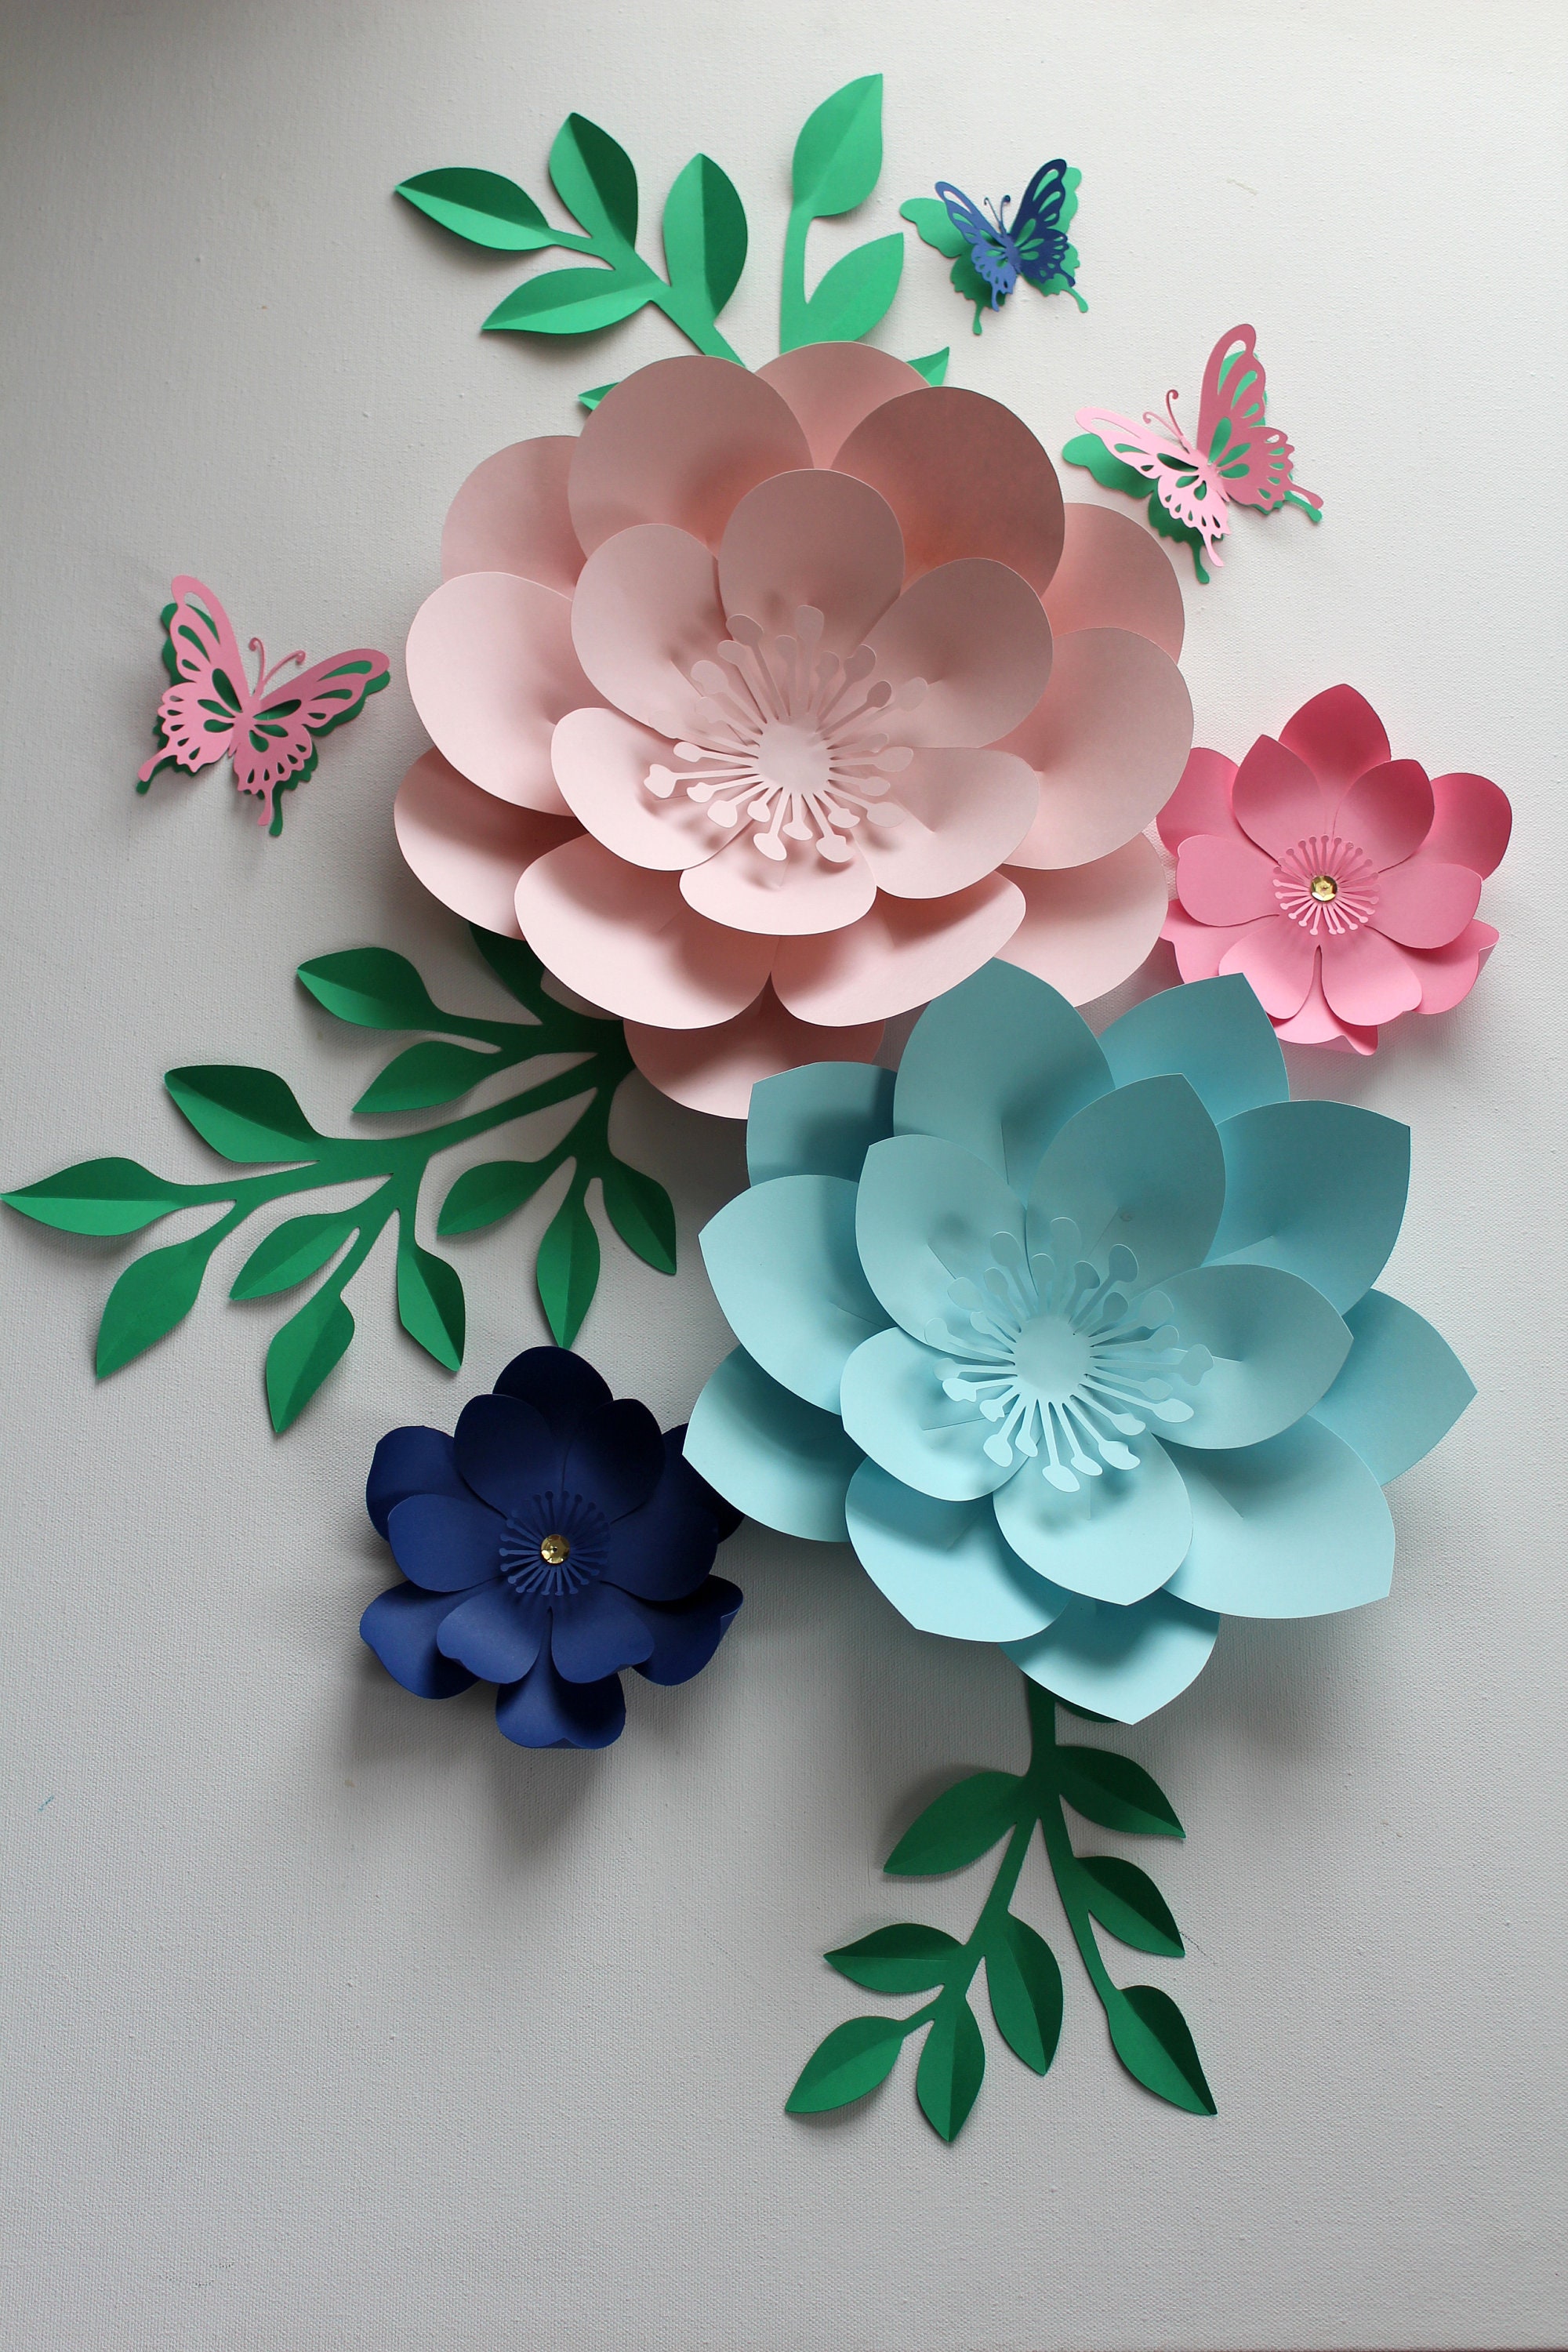 yly\'s love yly's love 3d paper flower decorations giant paper